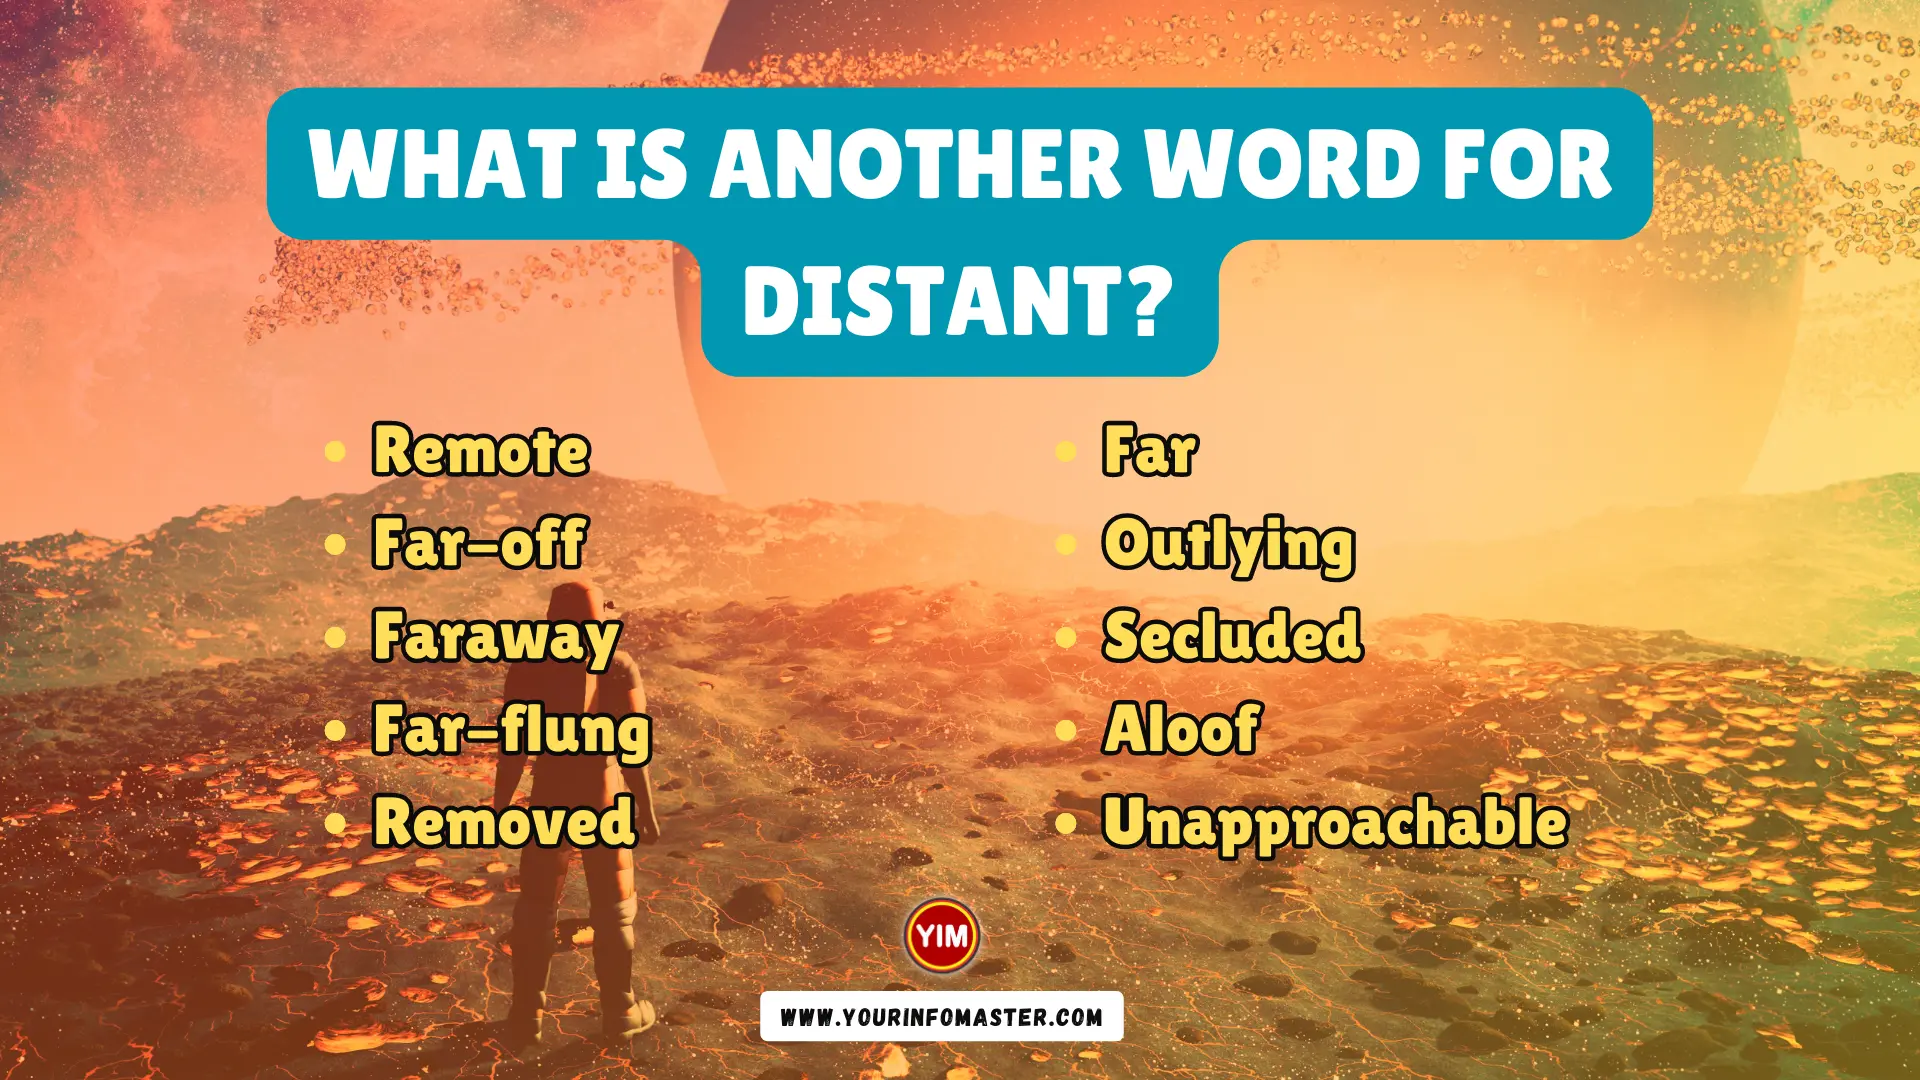 What is another word for Distant